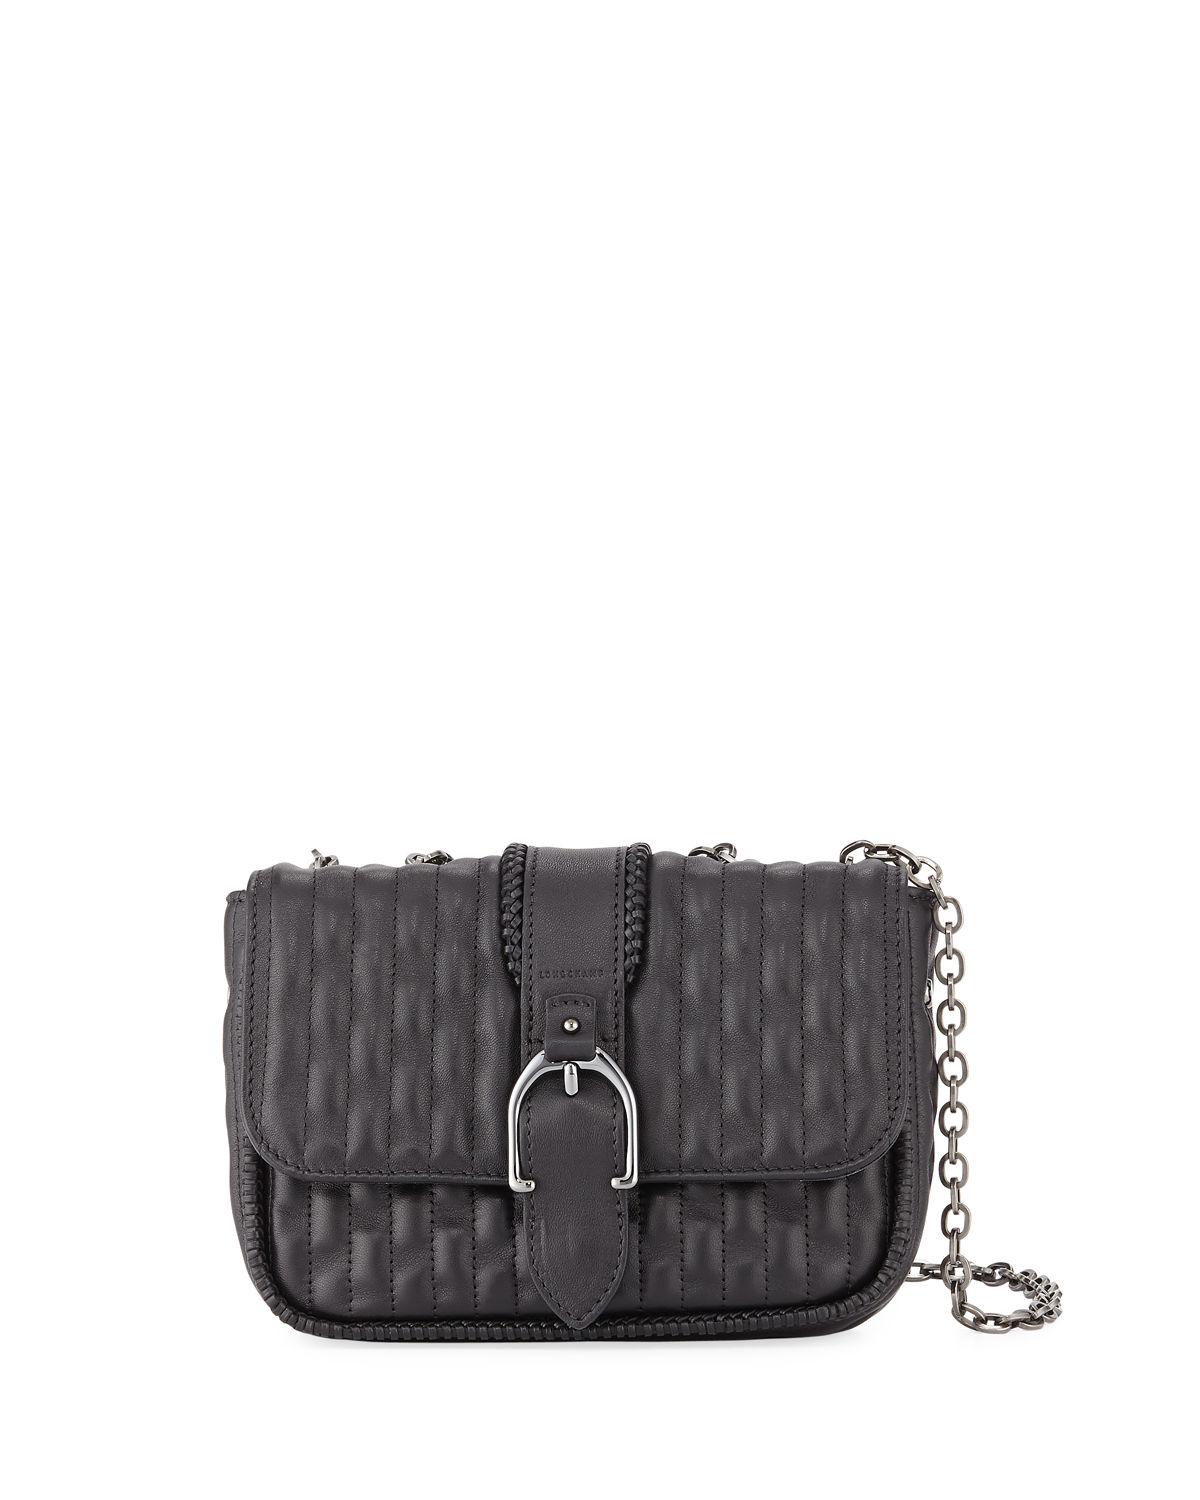 Longchamp Amazone Mini Quilted Leather Crossbody Bag in Black - Lyst